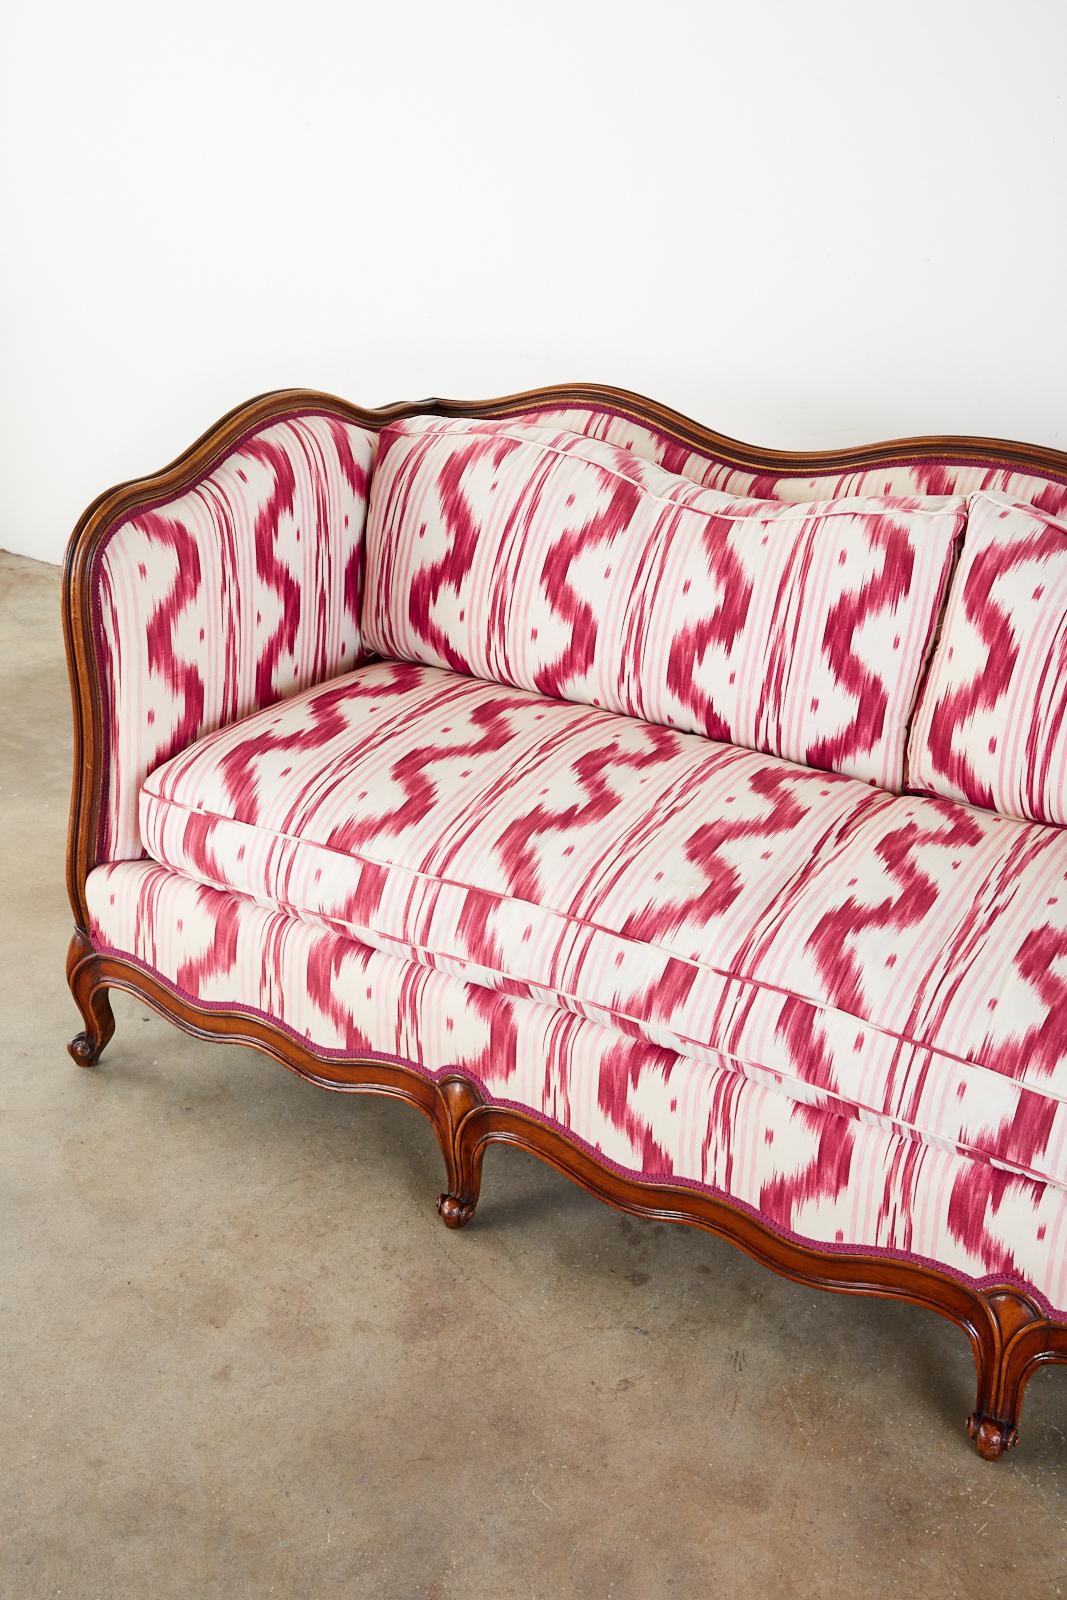 French Provincial Serpentine Canape Settee Pierre Frey Toile Ikat 2